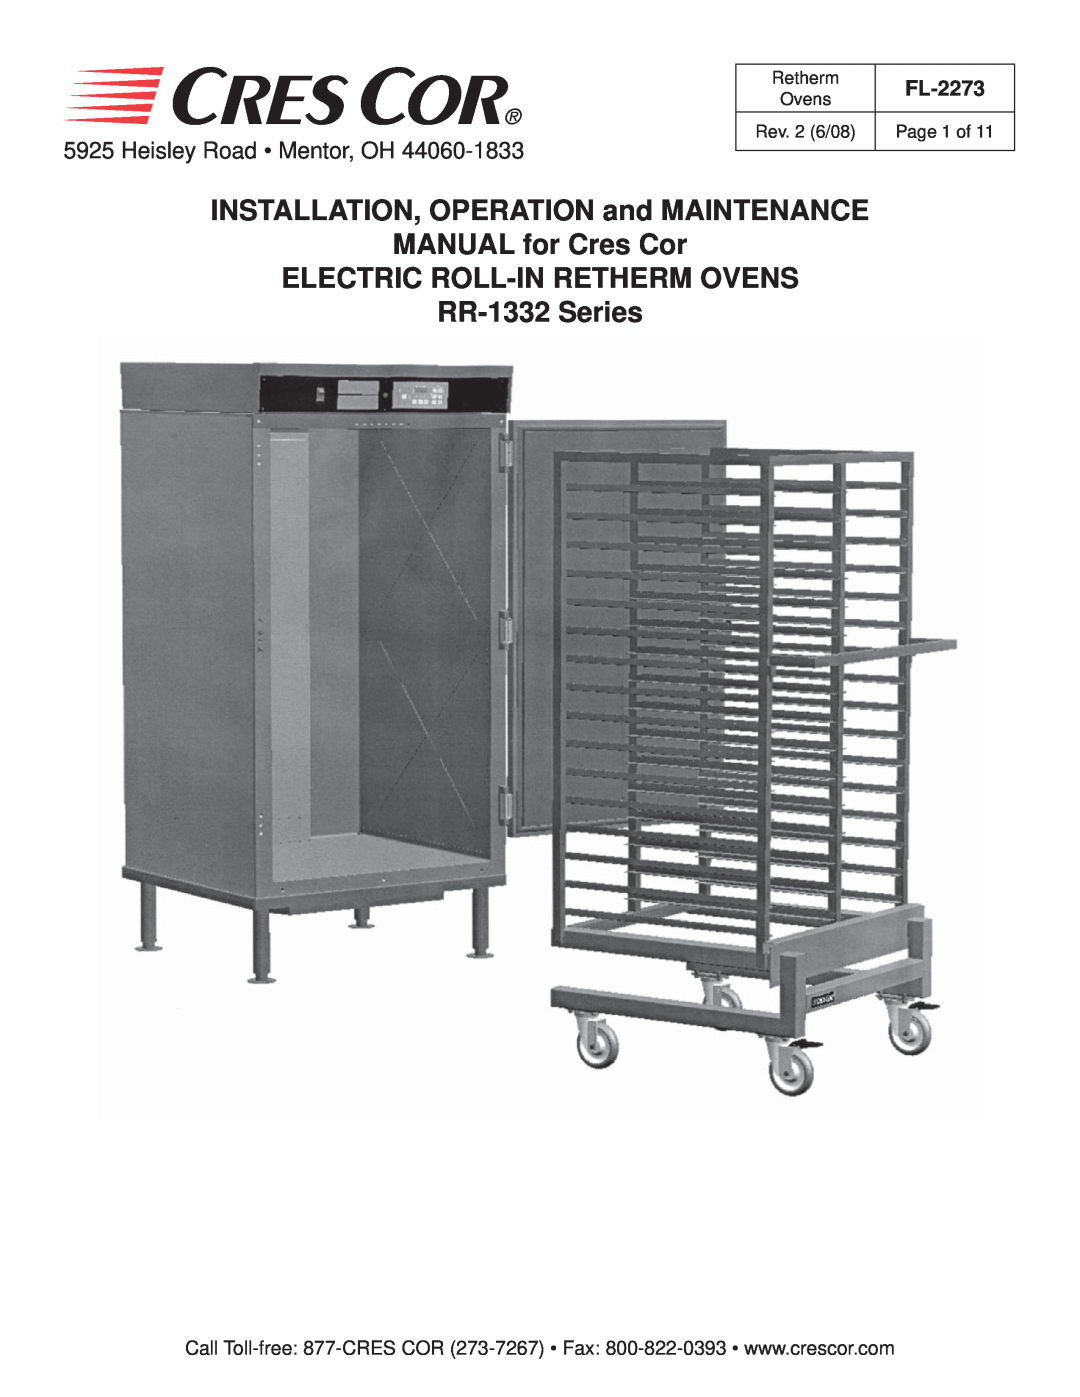 Cres Cor RR-1332 Series Retherm Ovens manual INSTALLATION, OPERATION and MAINTENANCE MANUAL for Cres Cor, FL-2273 